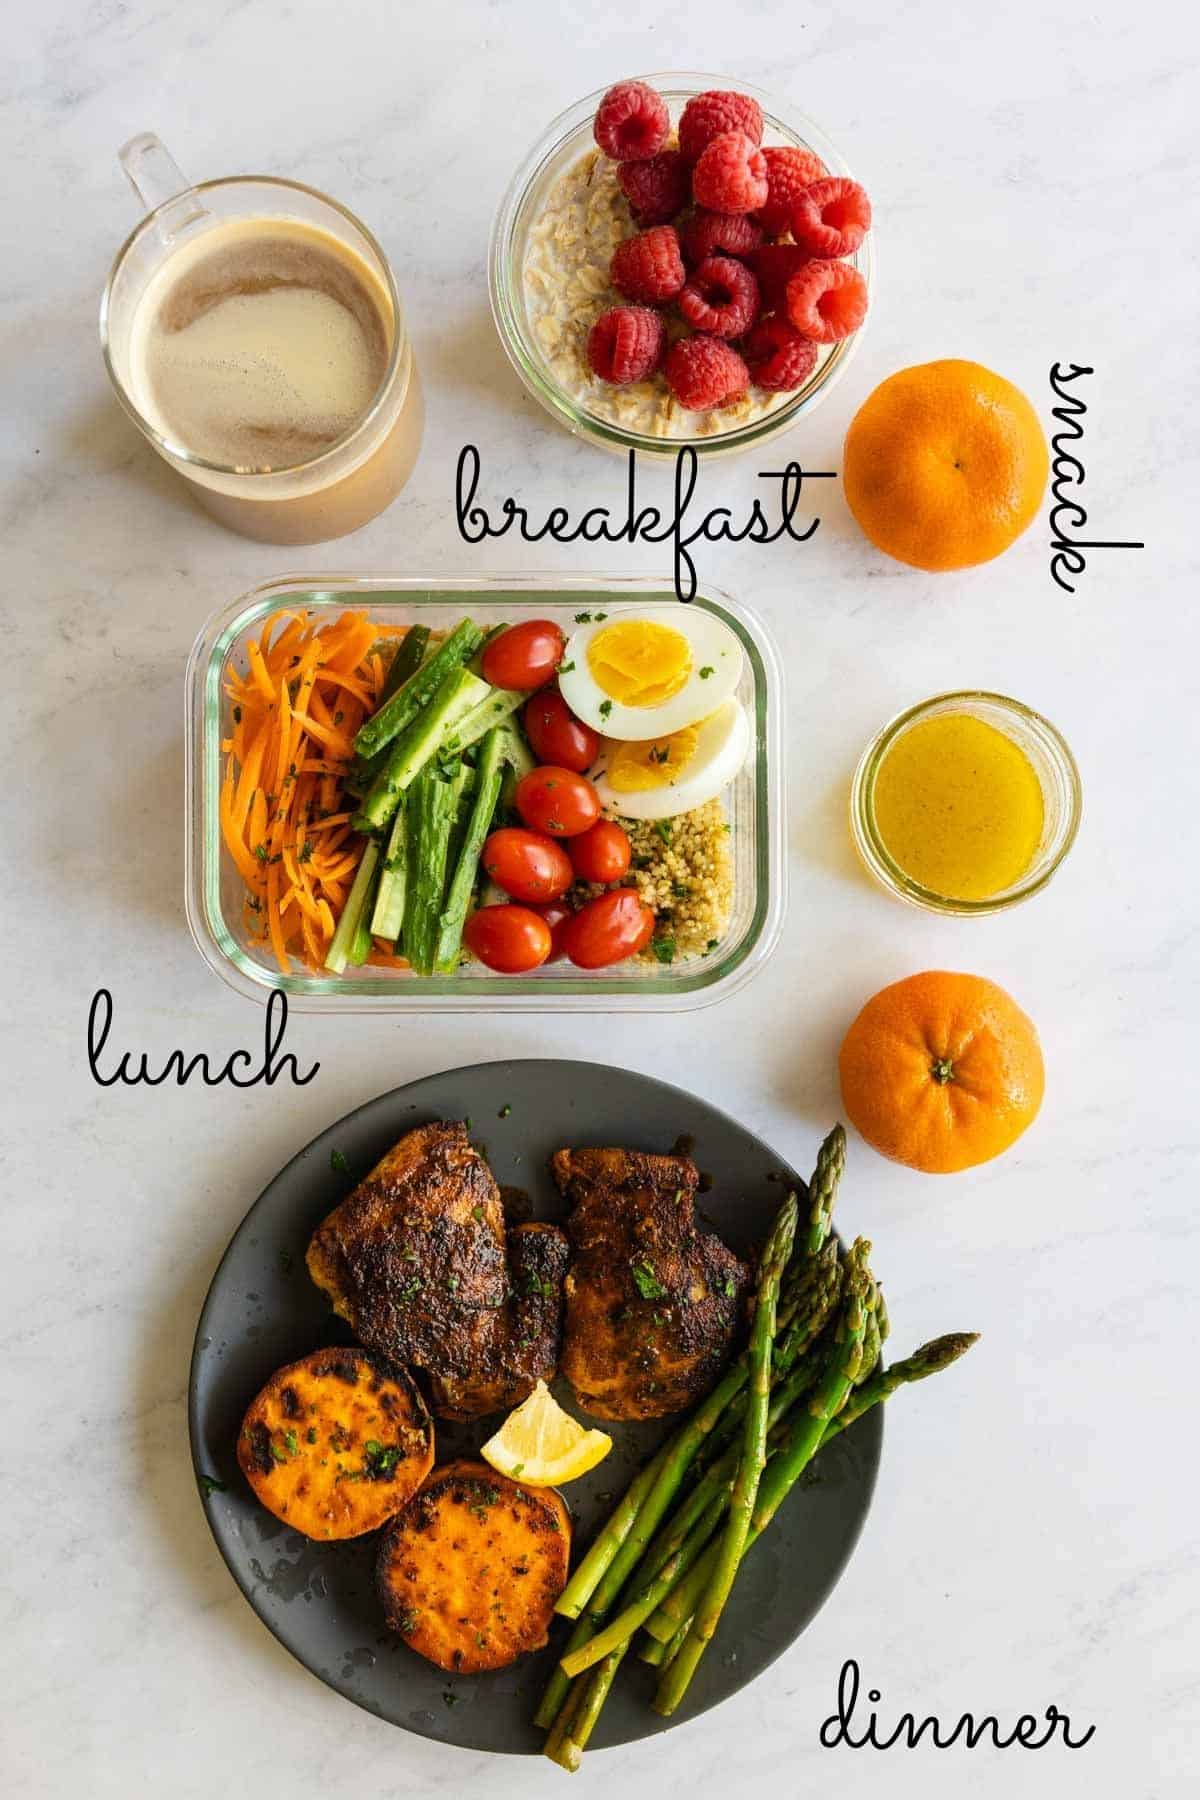 Whole Foods Breakfast Hours: Jumpstart Your Day! - Baked Ideas